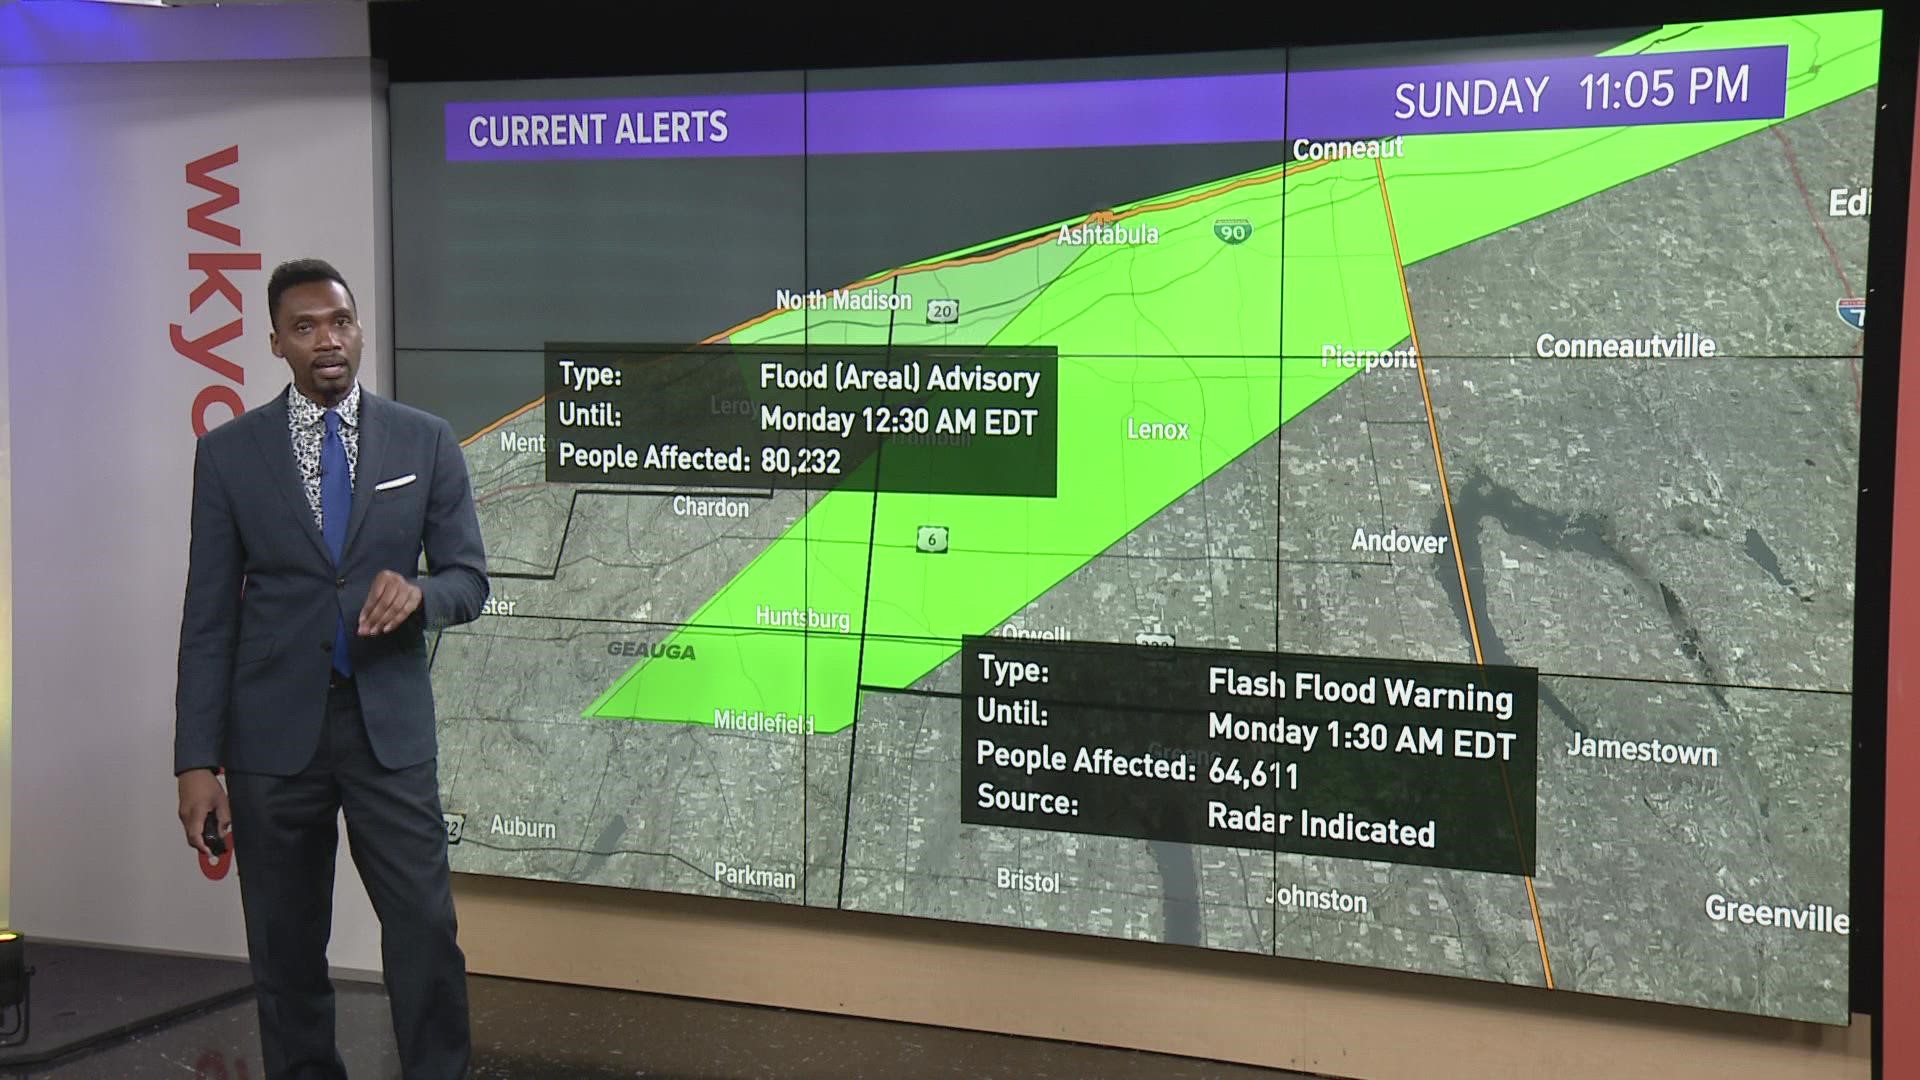 Flood Warnings are still active in Lorain County